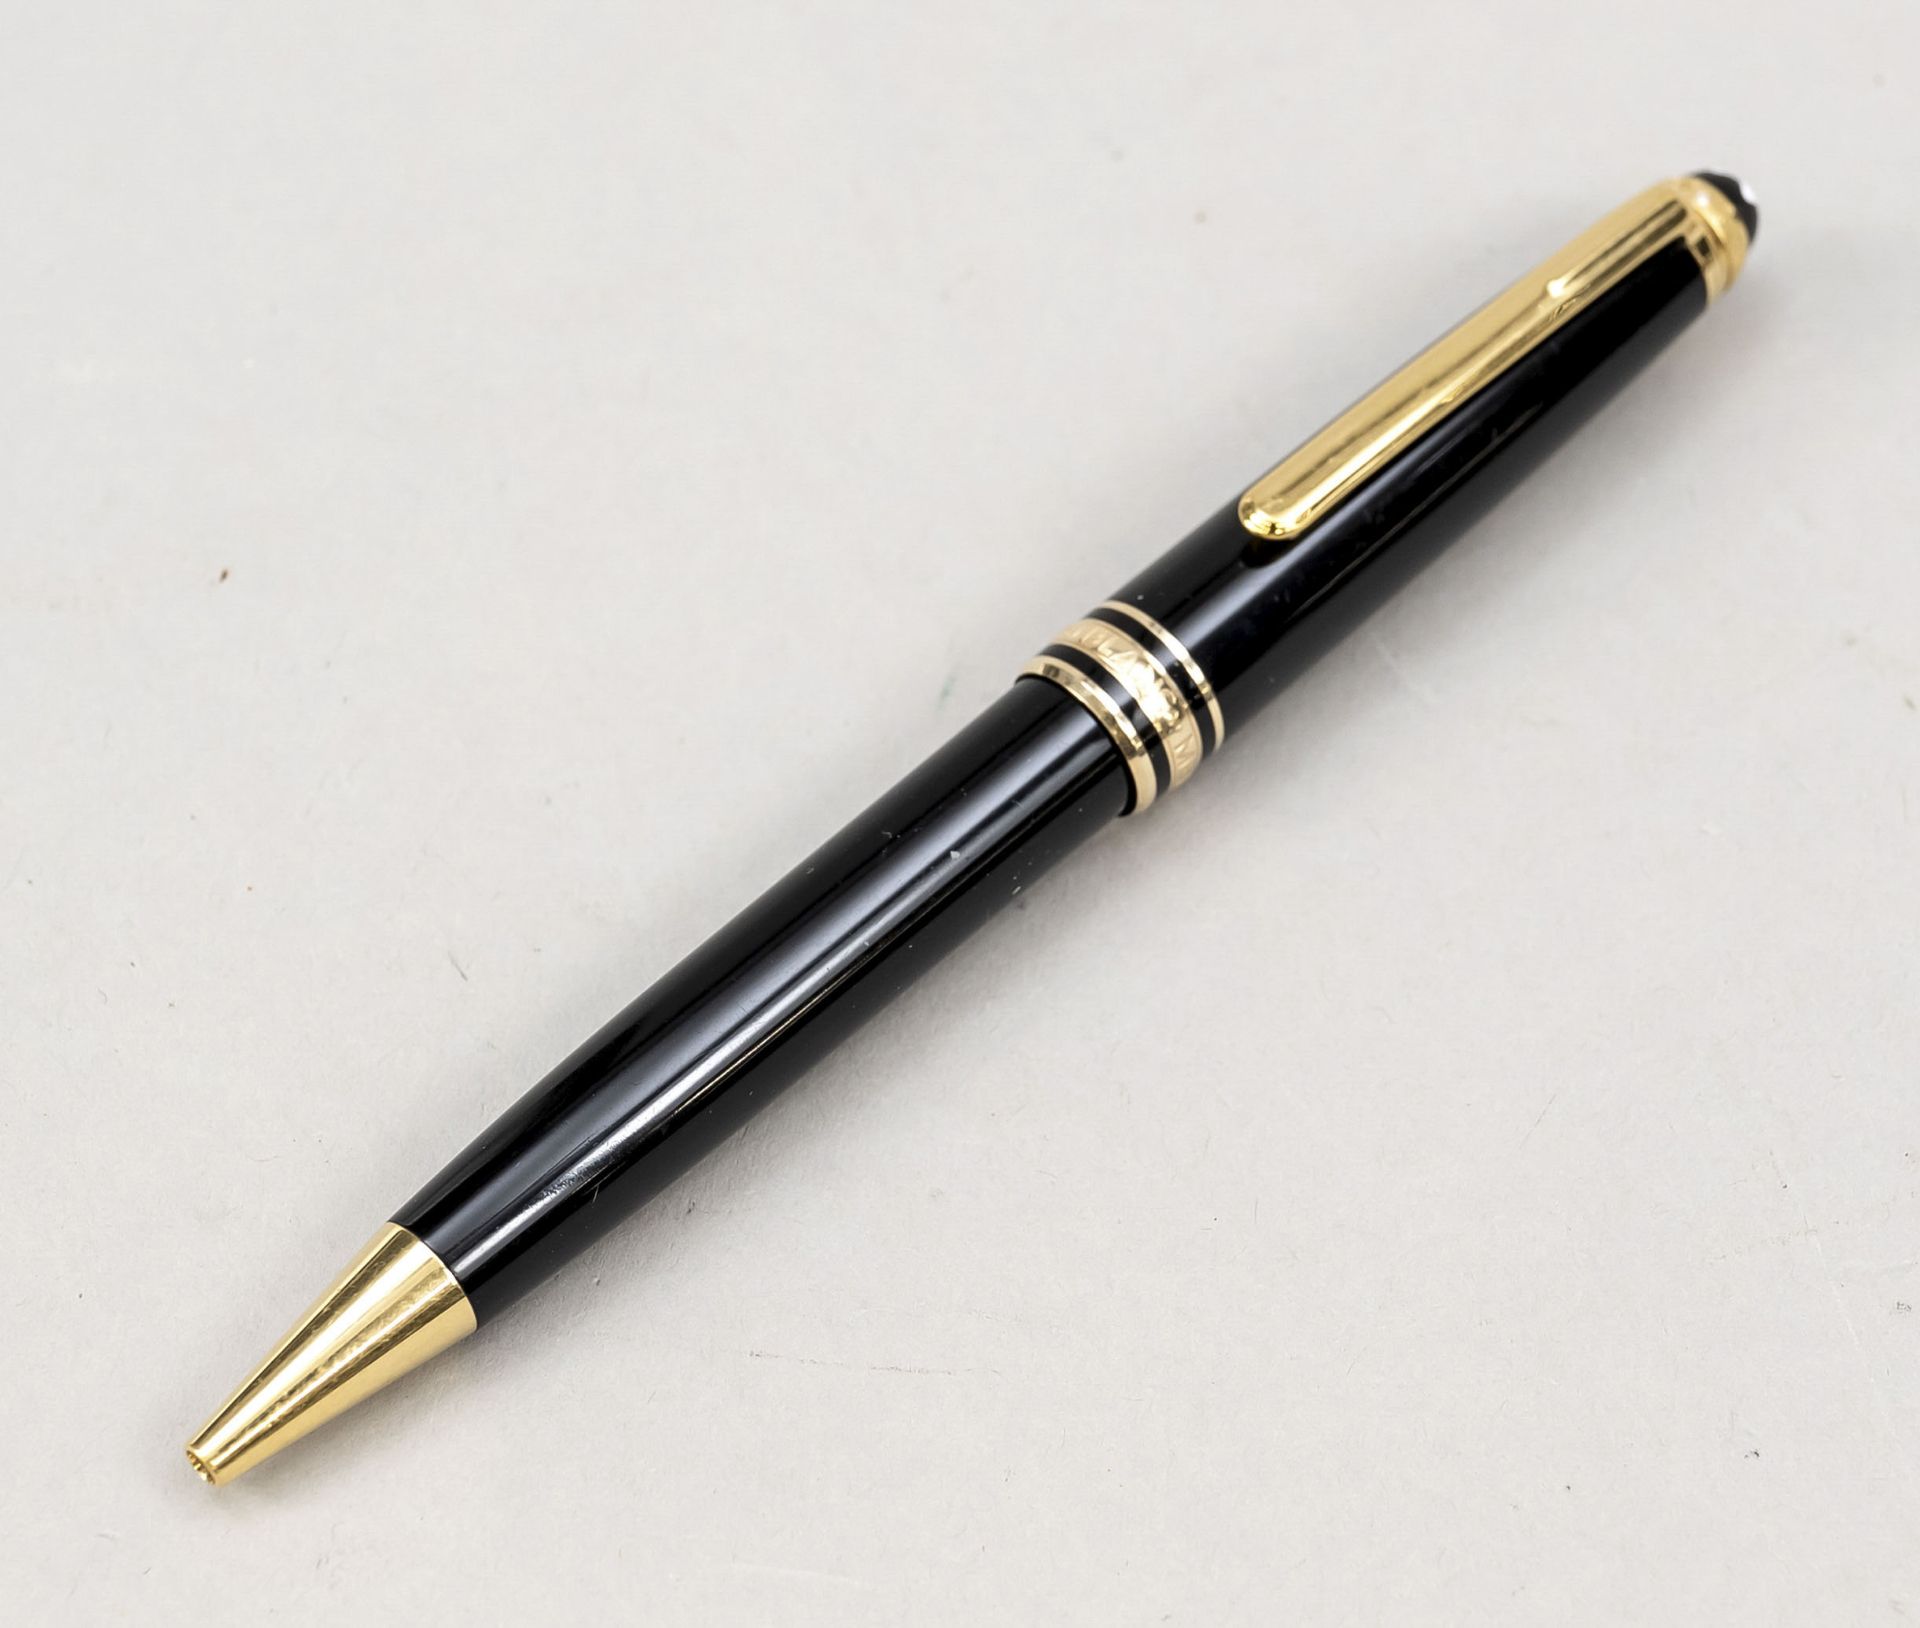 Montblanc Meisterstück ballpoint pen, 1980s, No. PV2210133, marked 75 Years of Passion, black